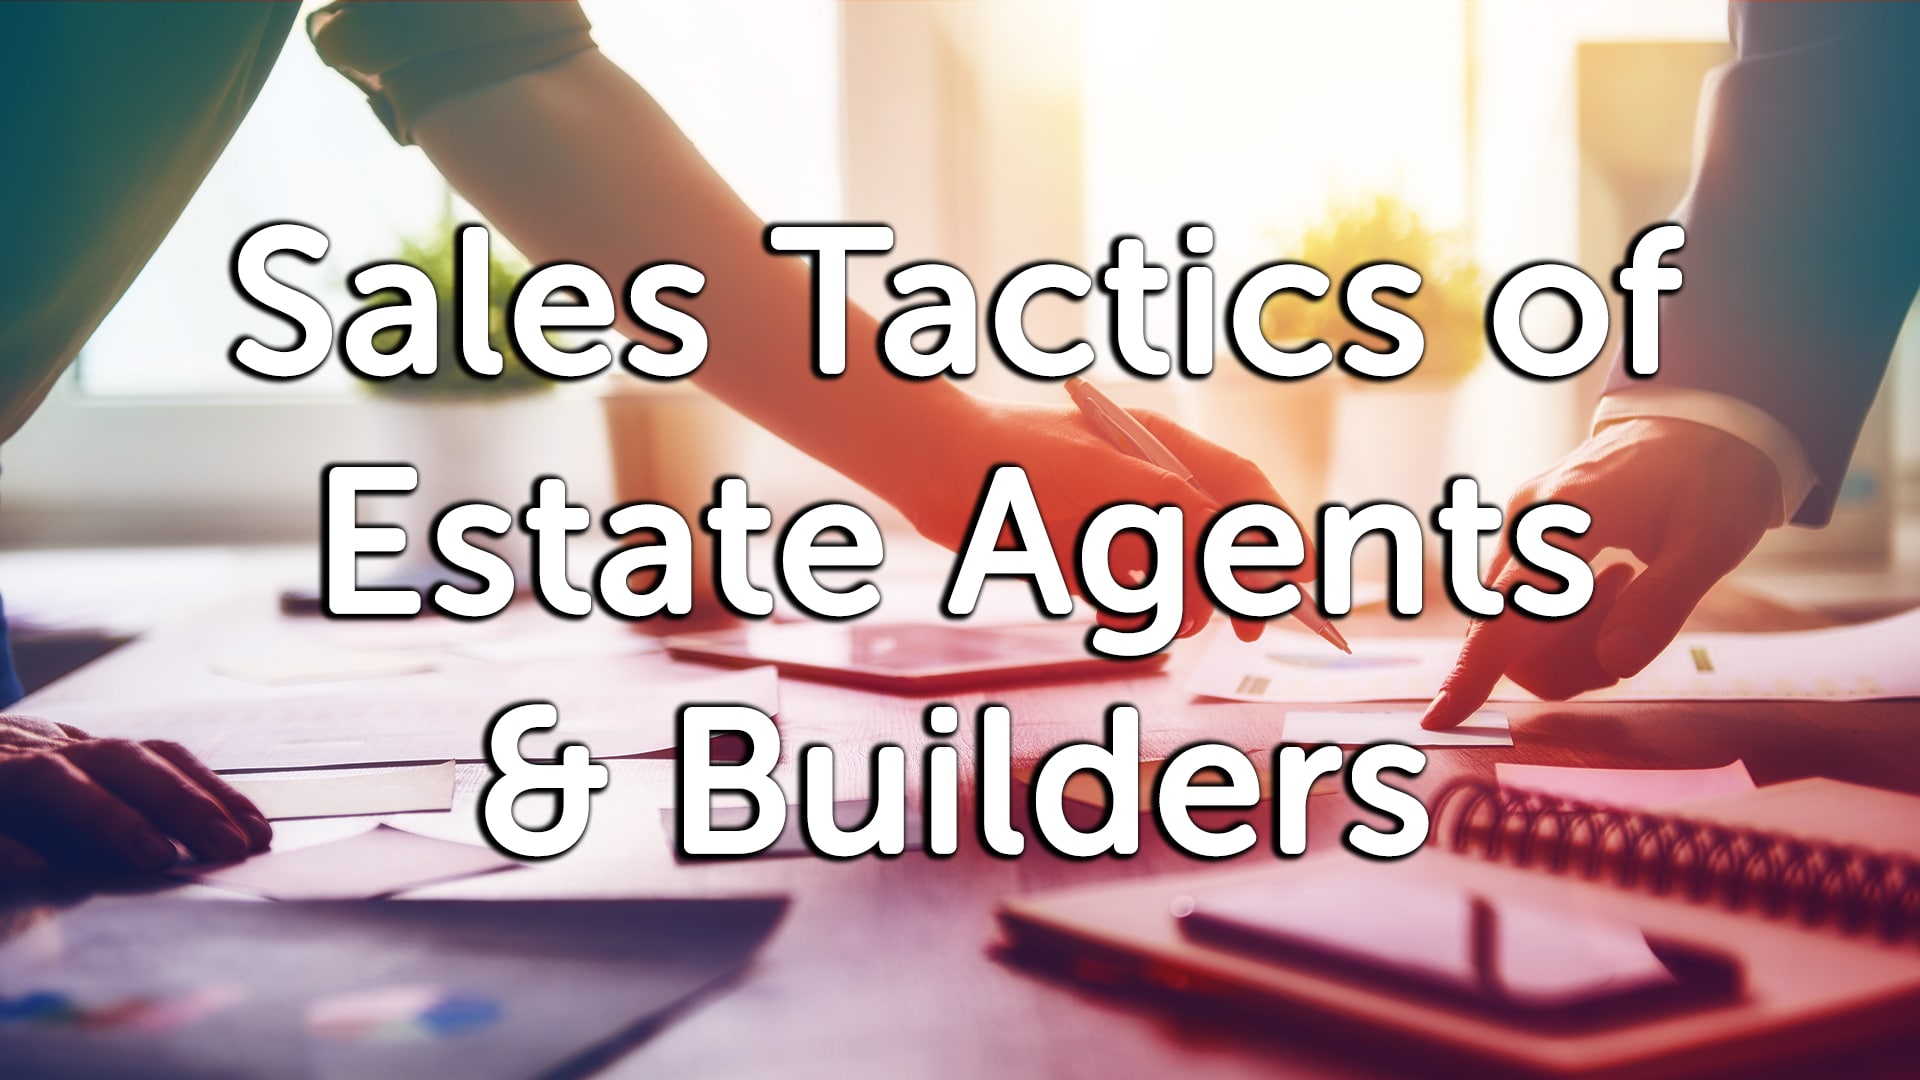 Do I have to use my Estate Agents, in-house Mortgage Advisor in Sunderland?